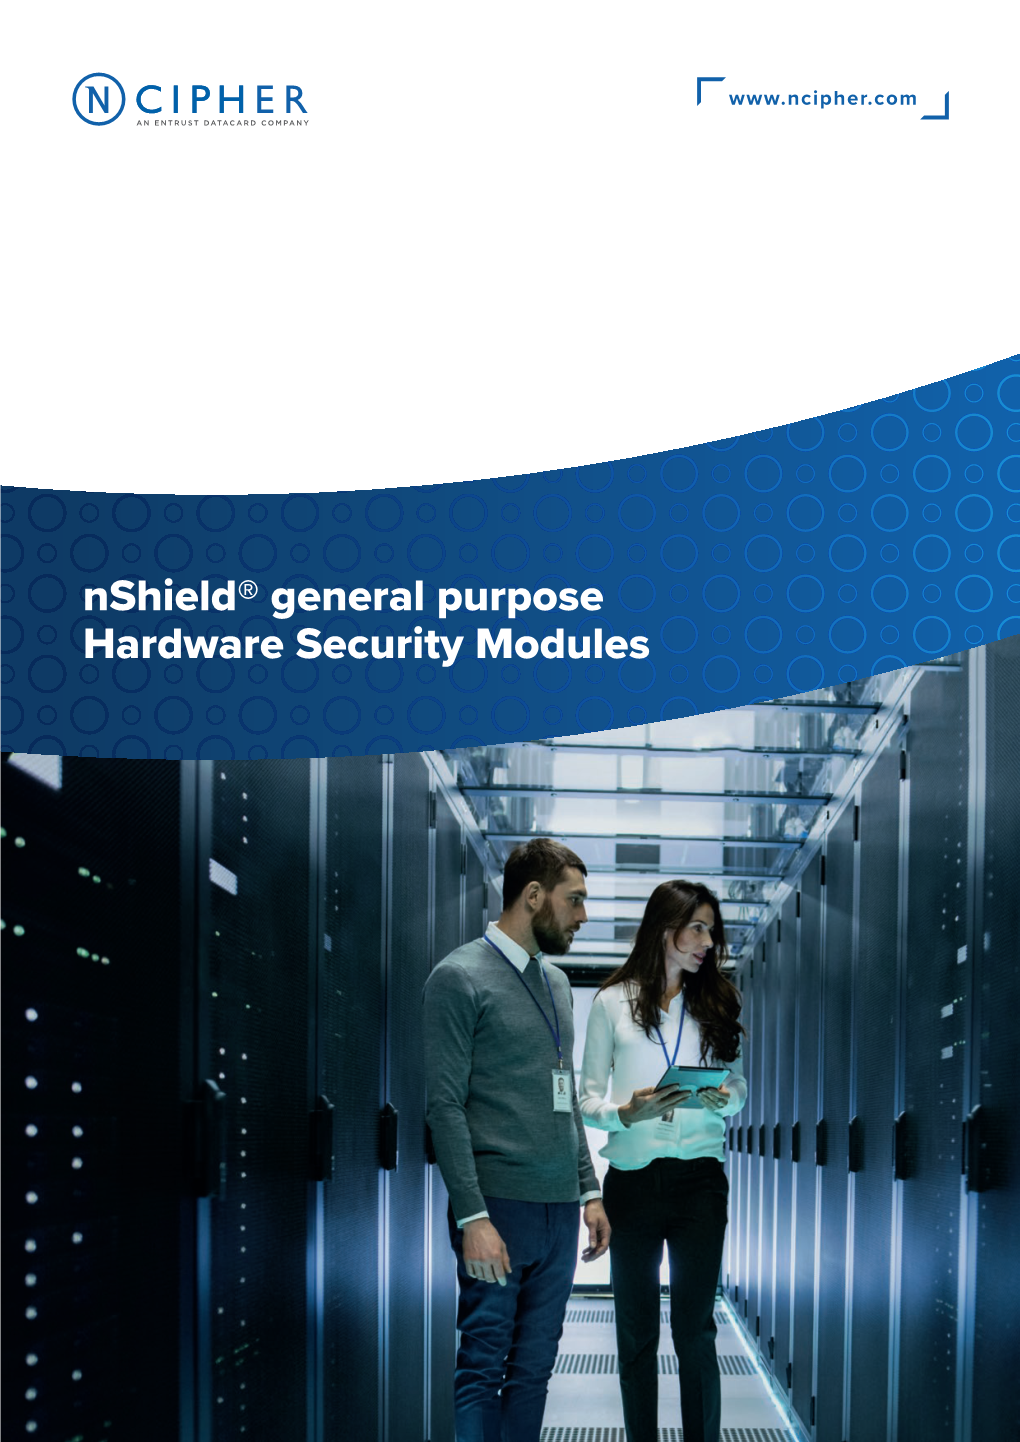 Nshield® General Purpose Hardware Security Modules Contents